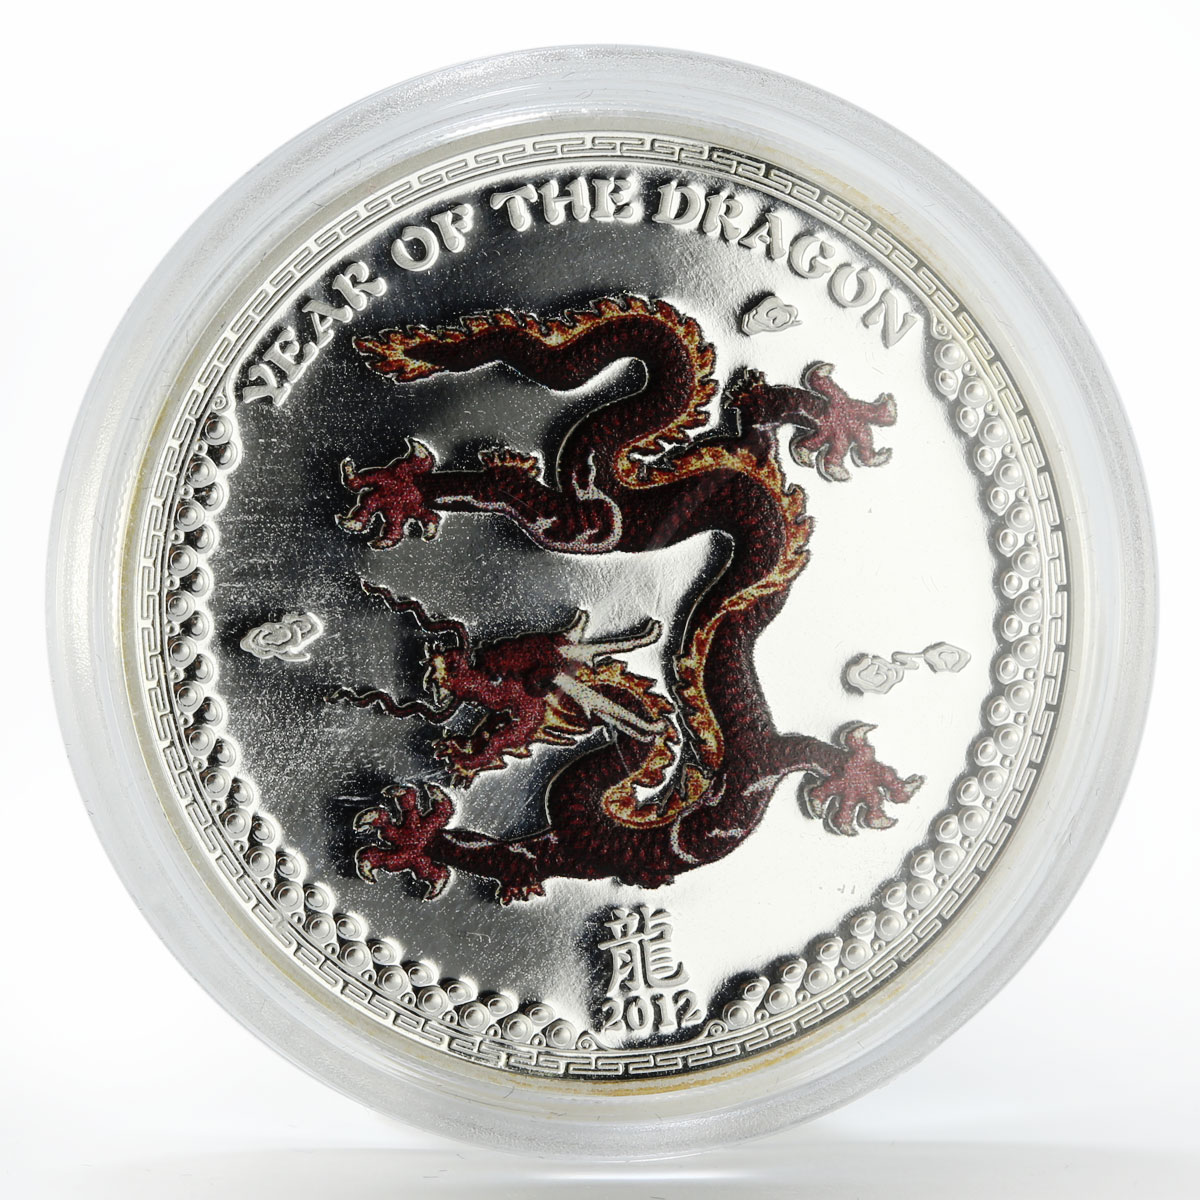 Palau set 2 coins Year of the Dragon proof colored silver 2012